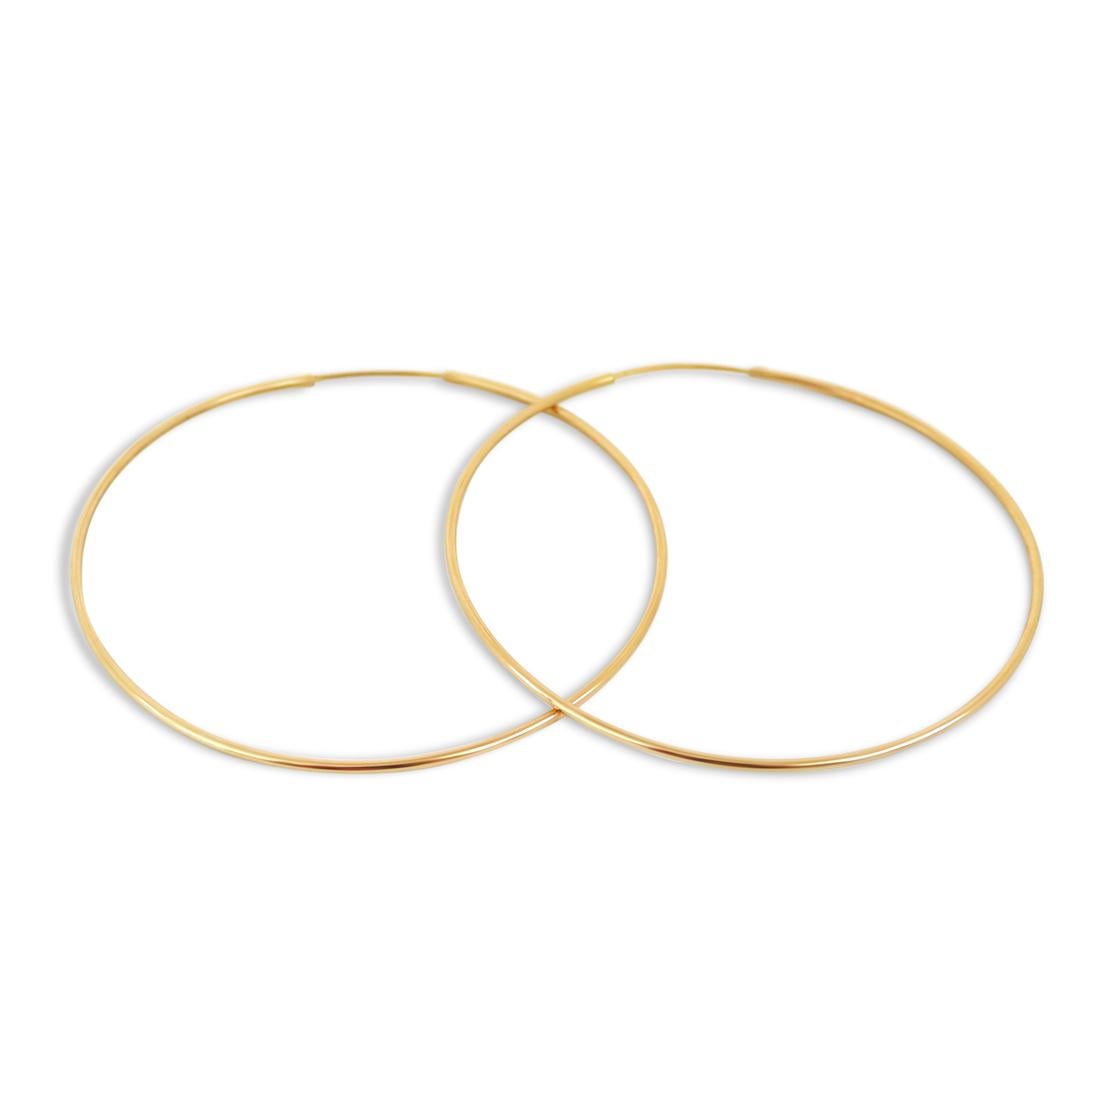 Maxi Hoops In Recycled Gold In New Condition For Sale In London, Richmond